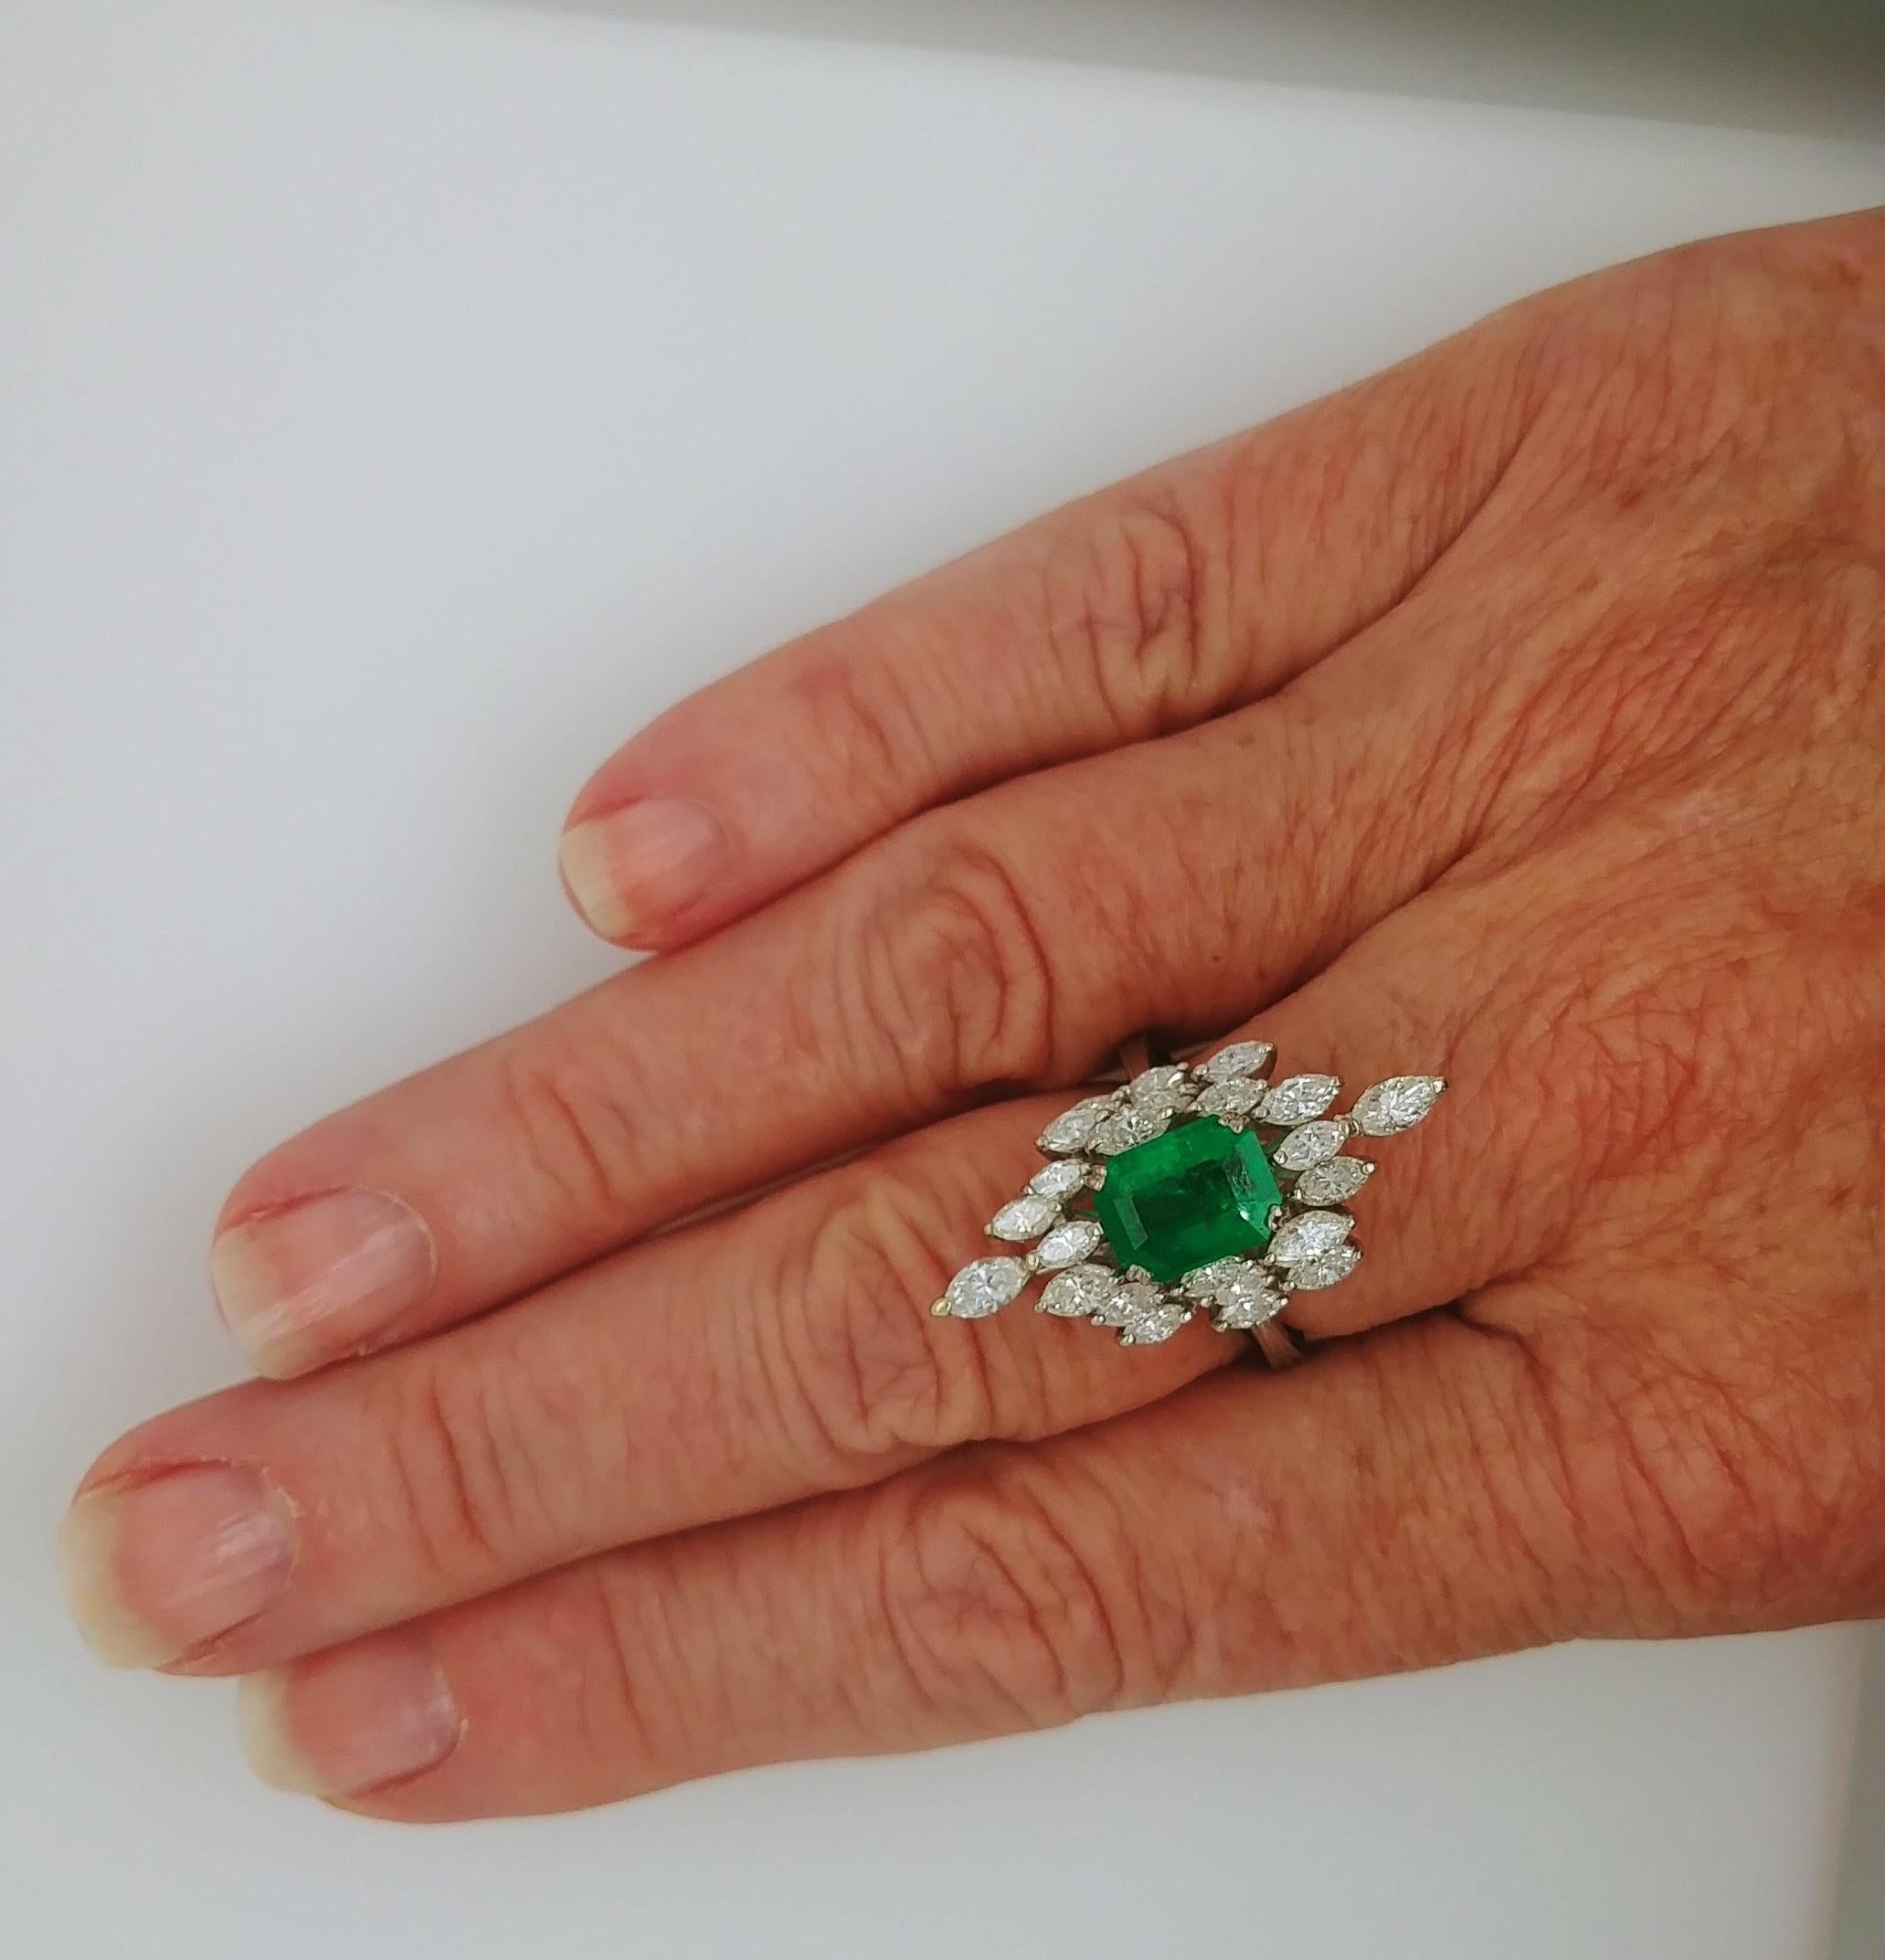 Classy and Elegant Ladies Emerald and Diamond Cocktail Fashion Statement Ring is marquise shaped with a prong set deep green natural emerald cut Emerald measuring 9.15 x 7.14mm and weighing 2.36 carats in the center accentuated by 24 brilliant